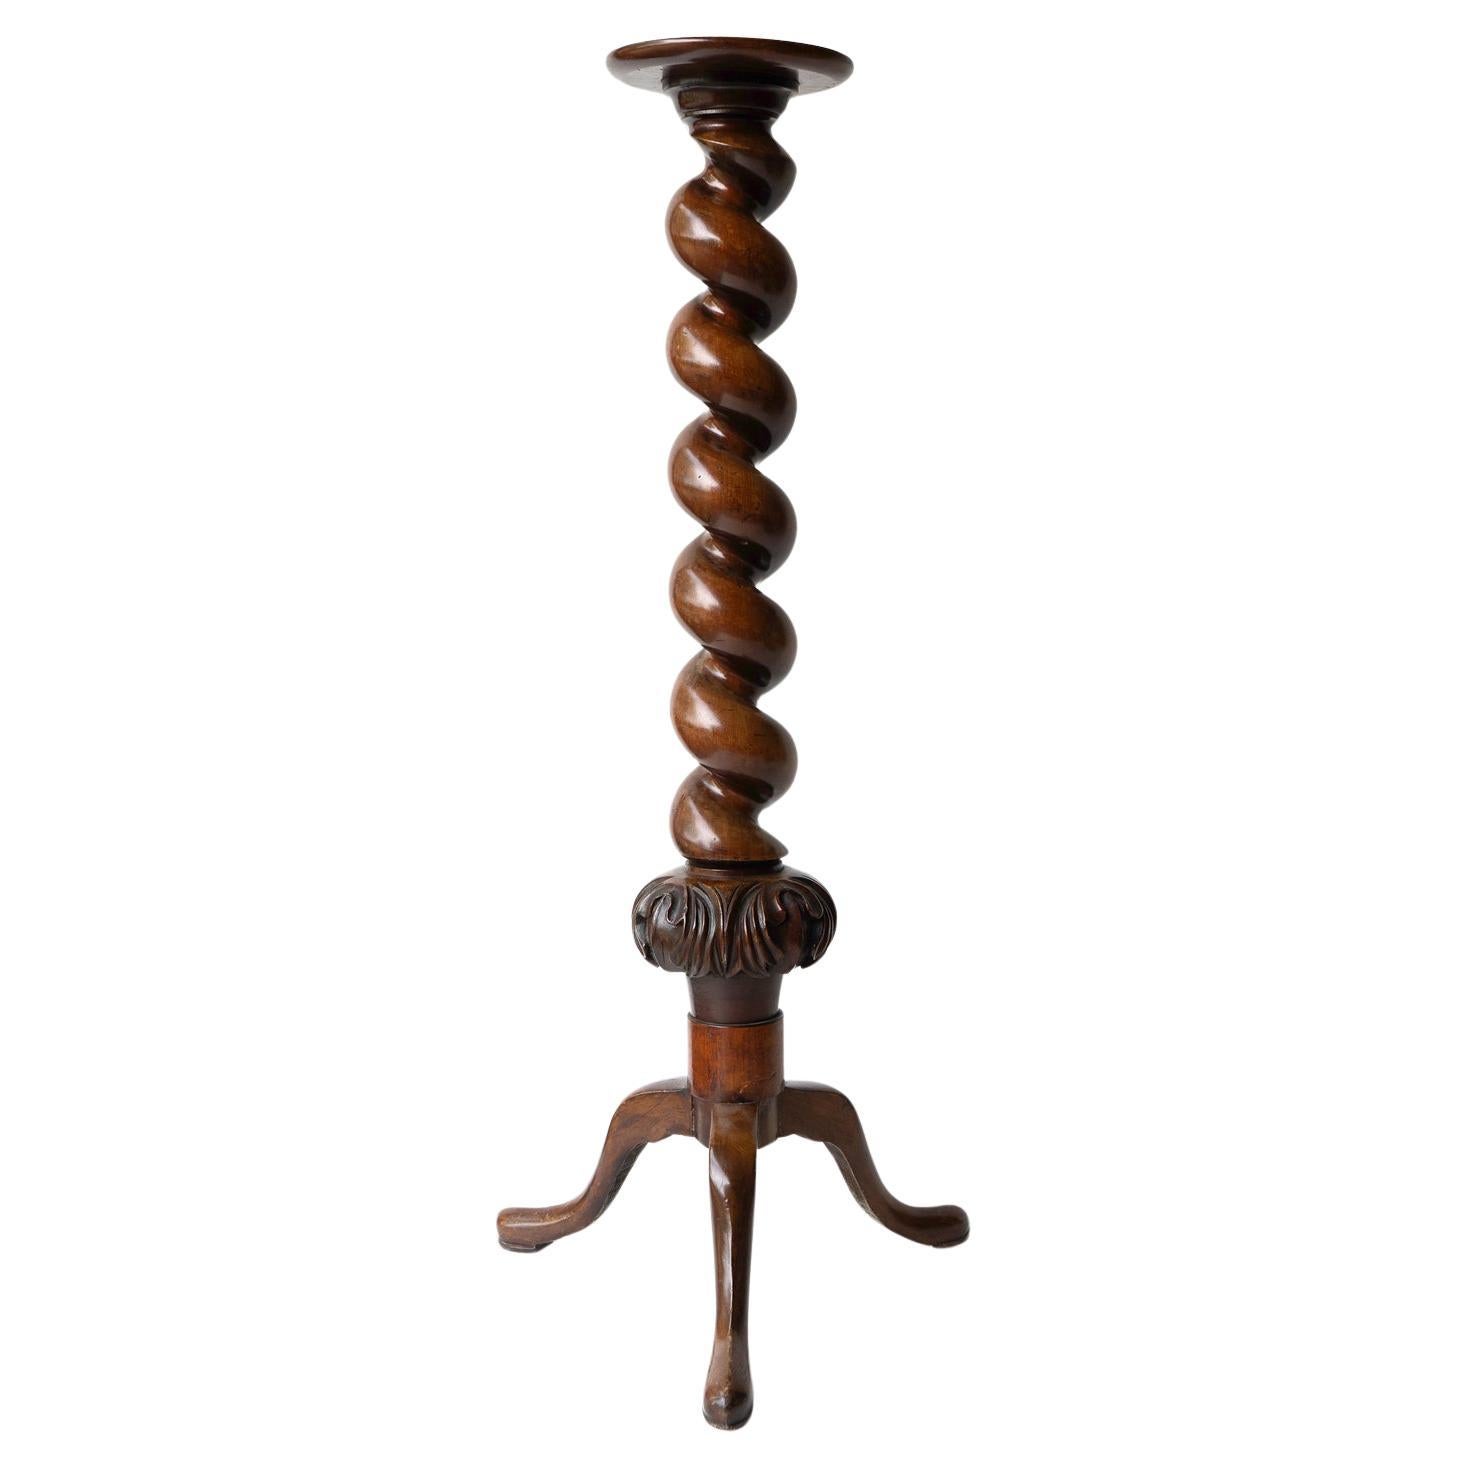 Antique Carved Mahogany Barley Twist Column Torchere, 19th Century Plant Stand